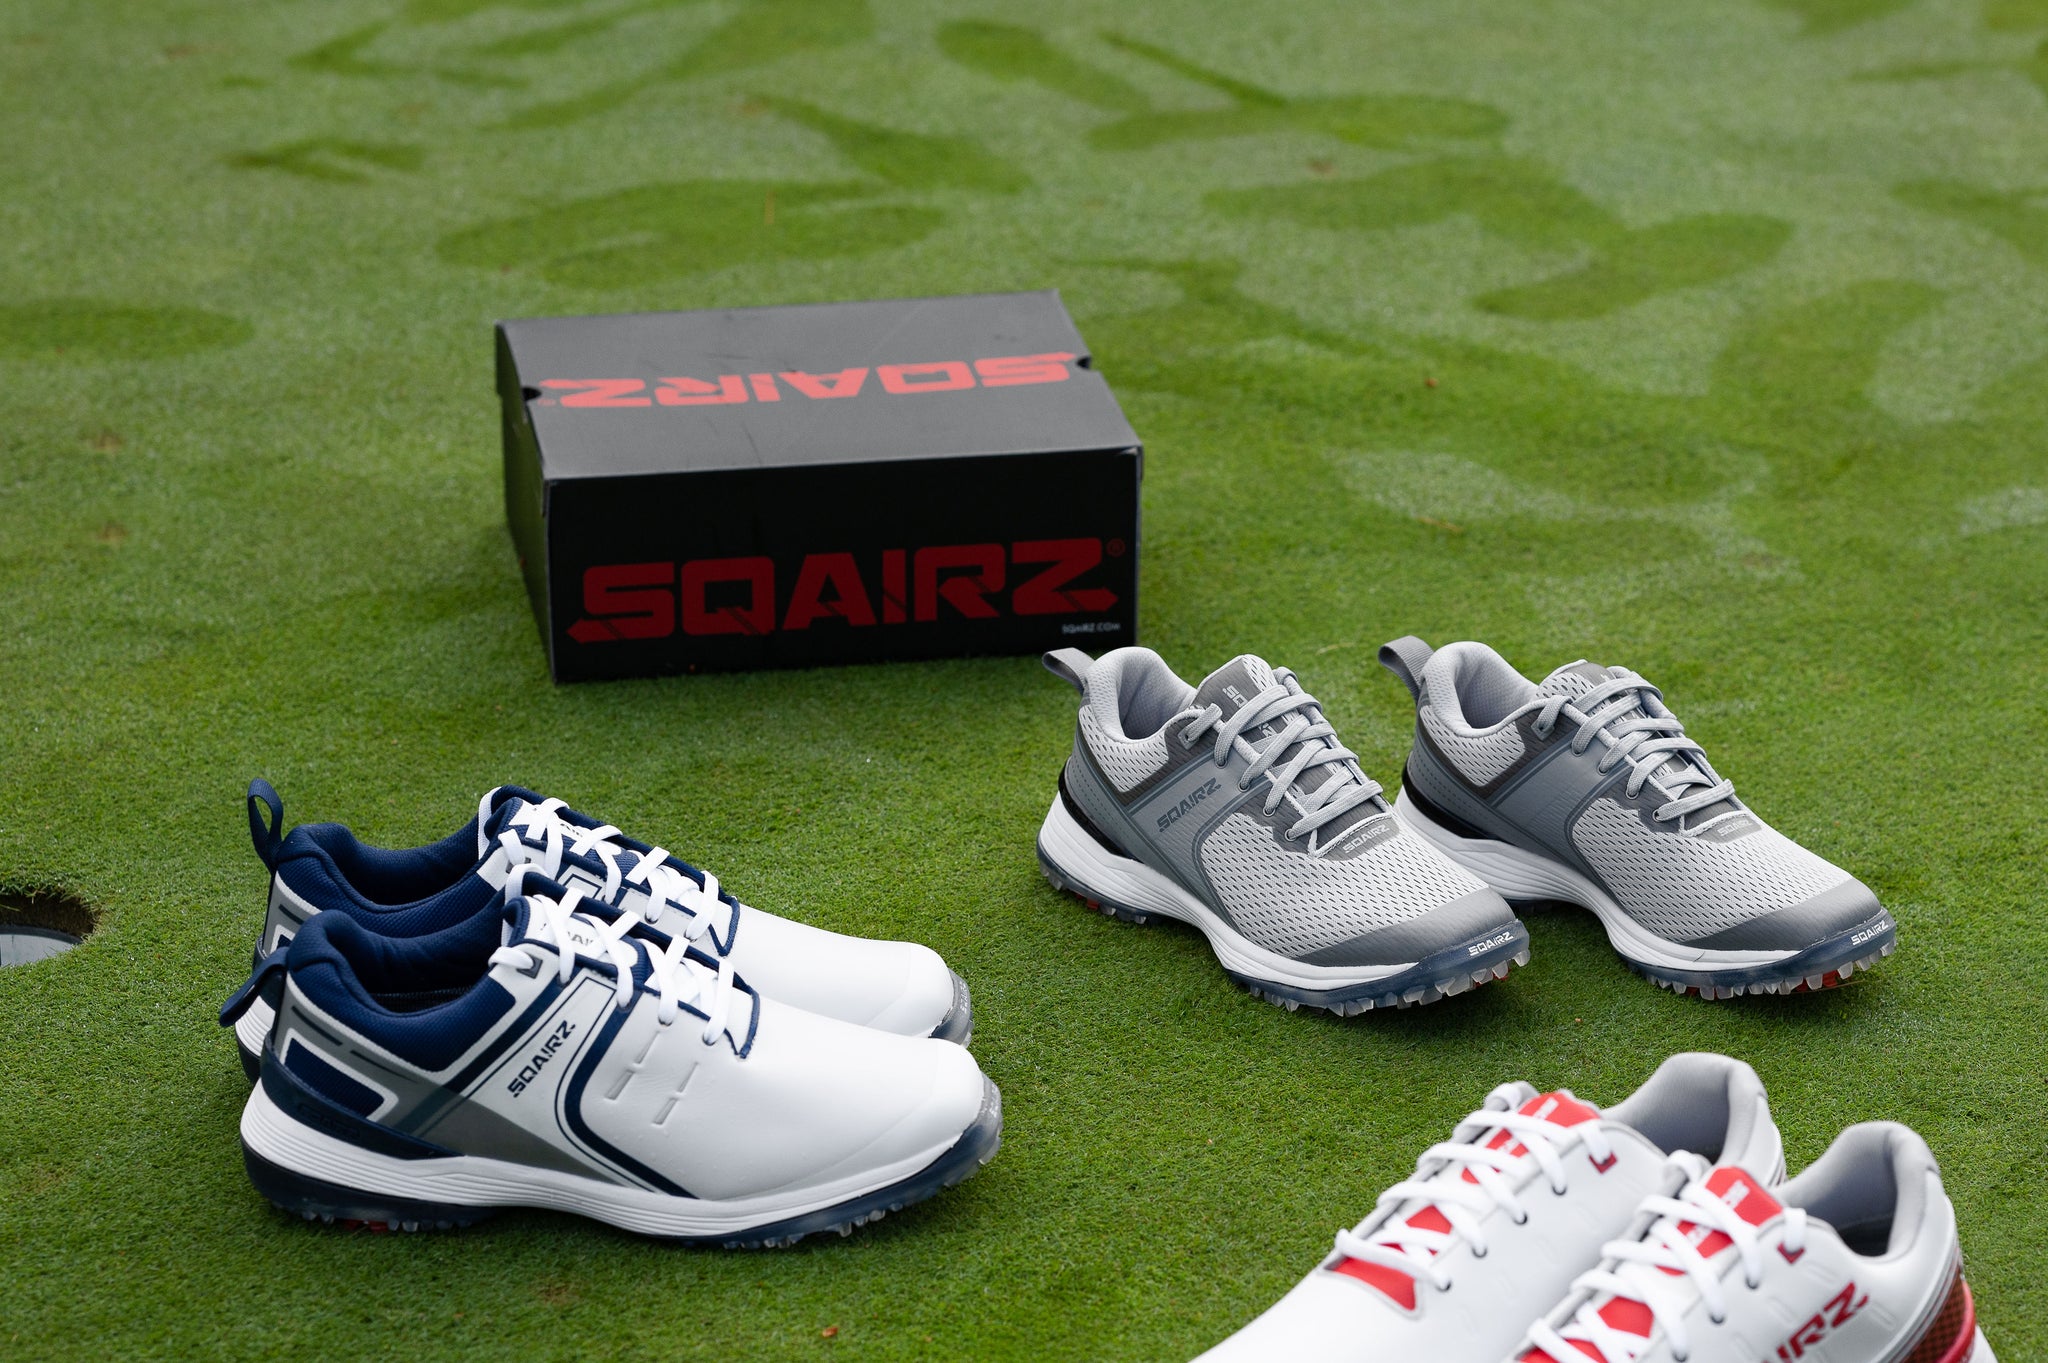 Play more than once a week? You should own more than one pair of golf shoes.